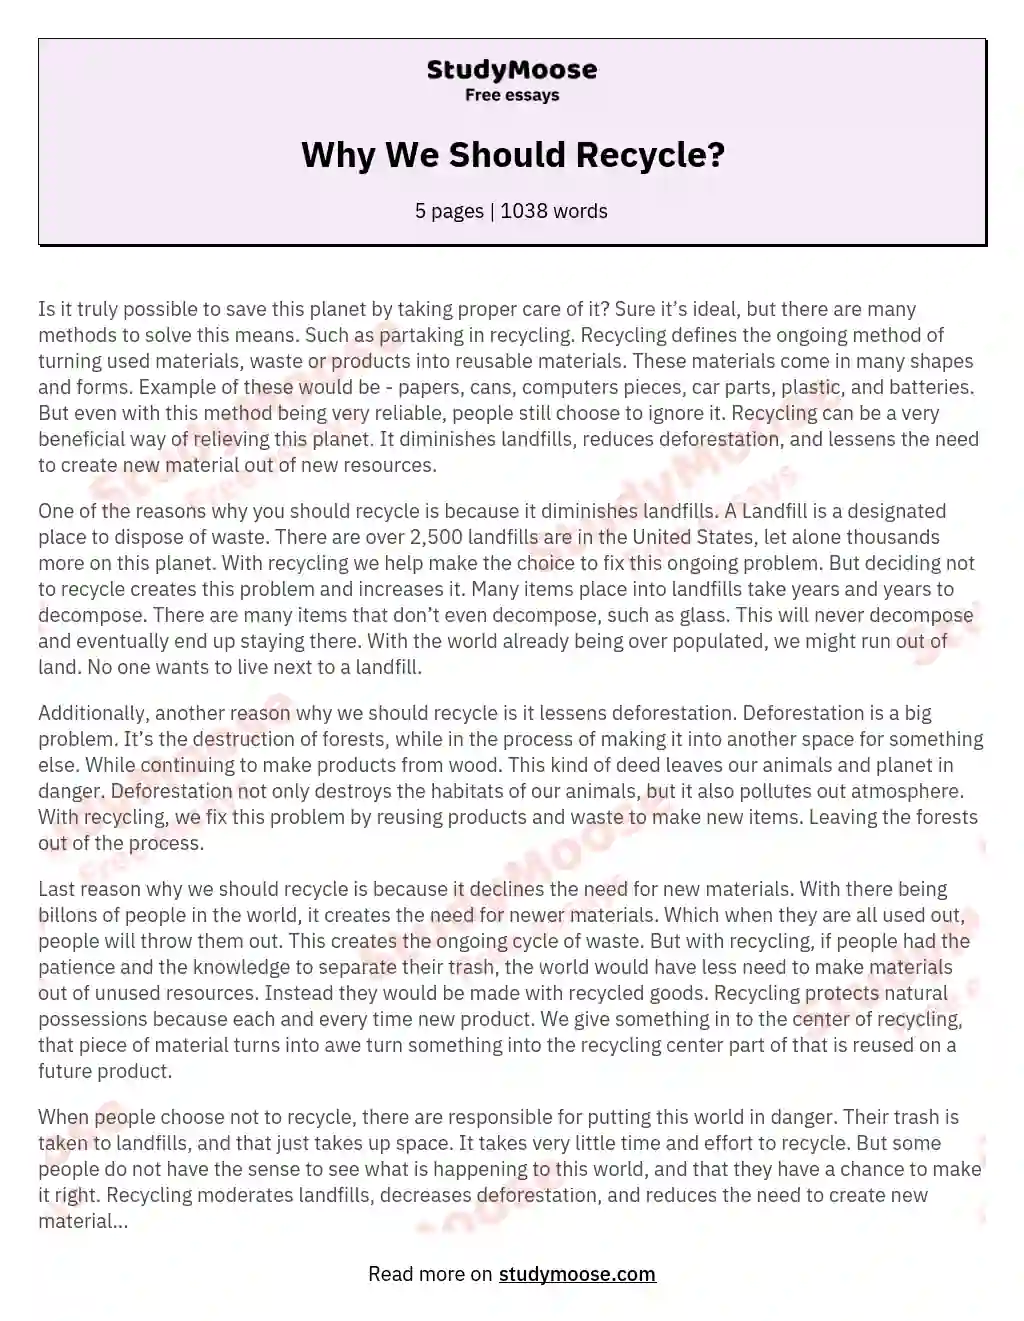 Why We Should Recycle? essay